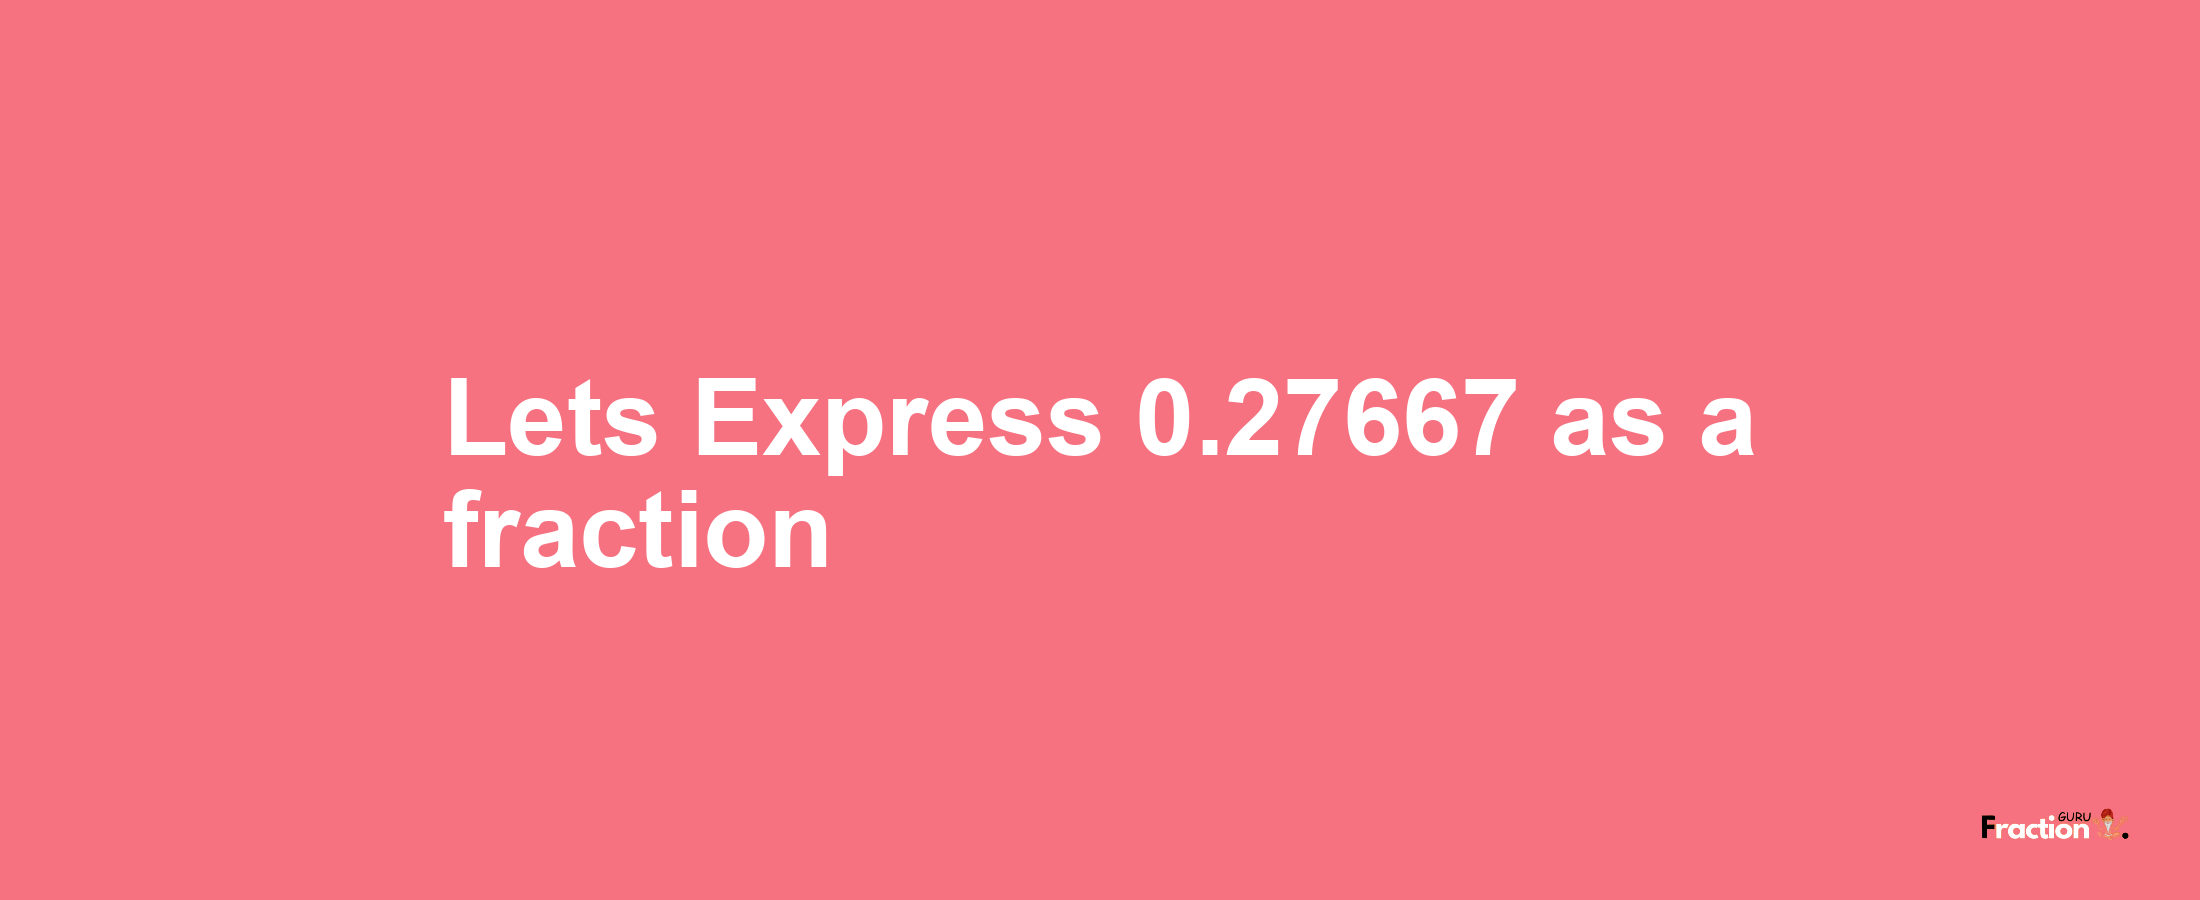 Lets Express 0.27667 as afraction